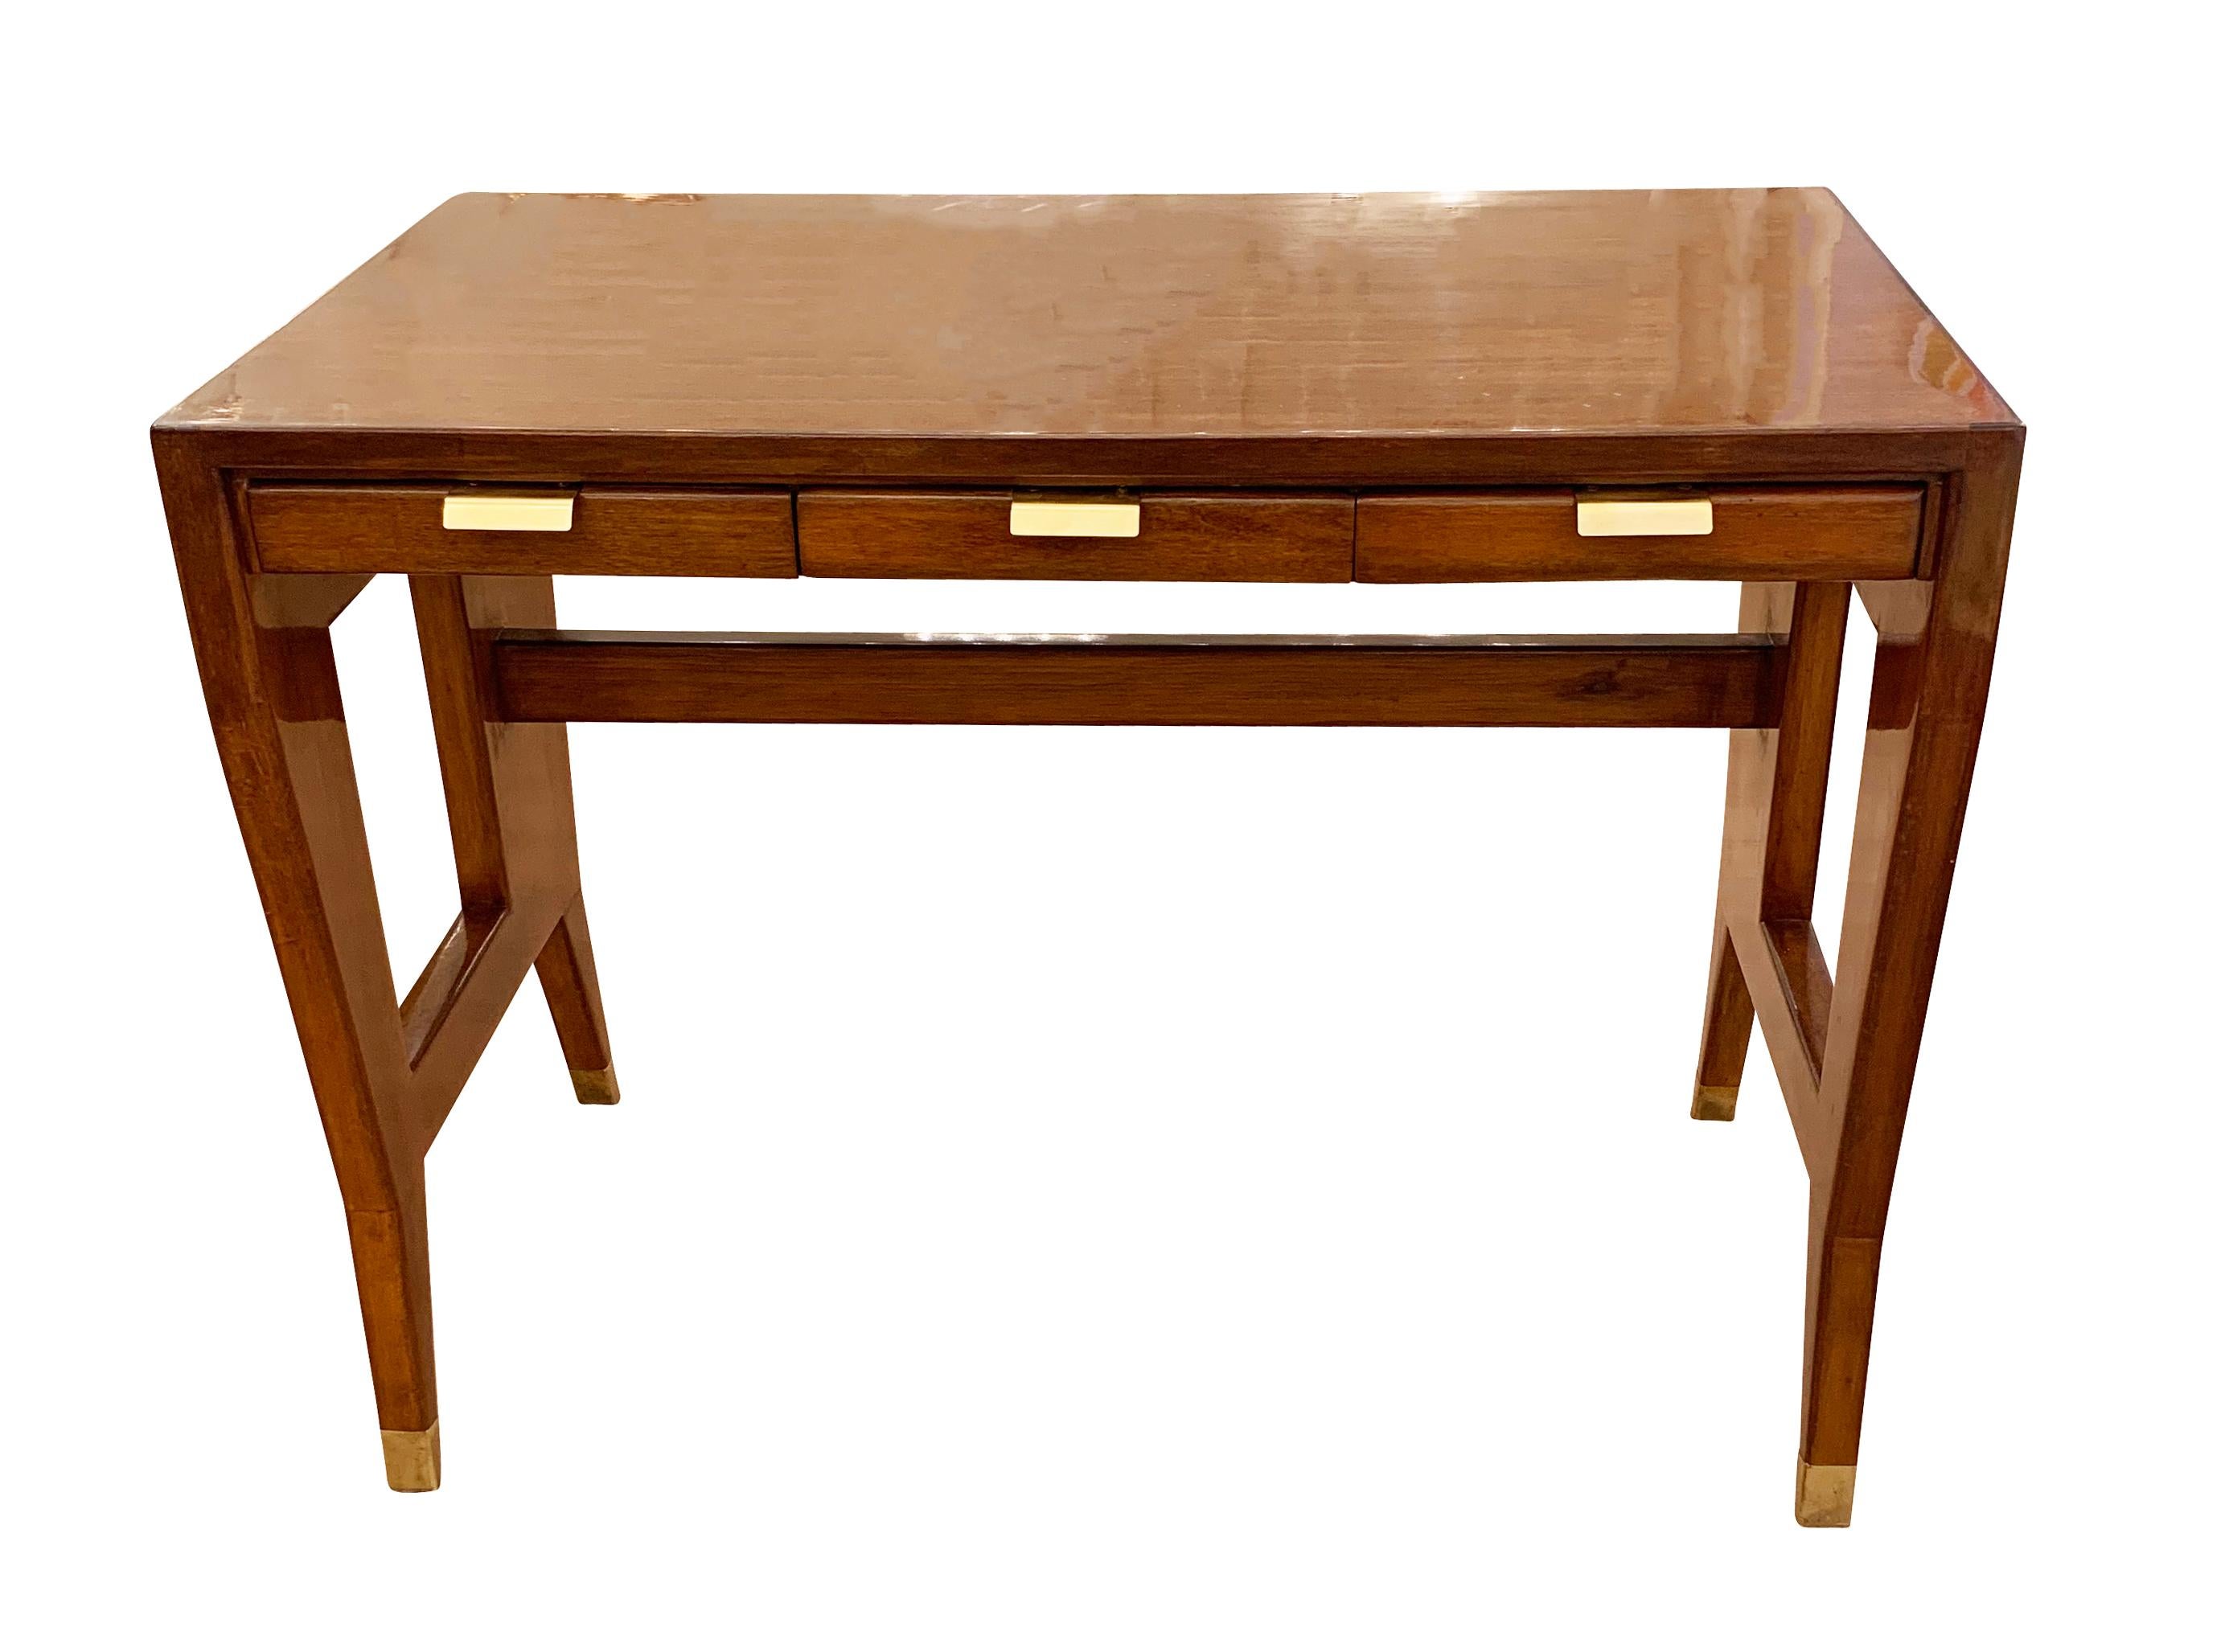 Iconic 1950s desk designed by Gio Ponti for BNL. Walnut frame and laminate top with exquisite brass details in the handles and feet.

Condition: Excellent vintage condition, minor wear consistent with age and use.

Measures: Width: